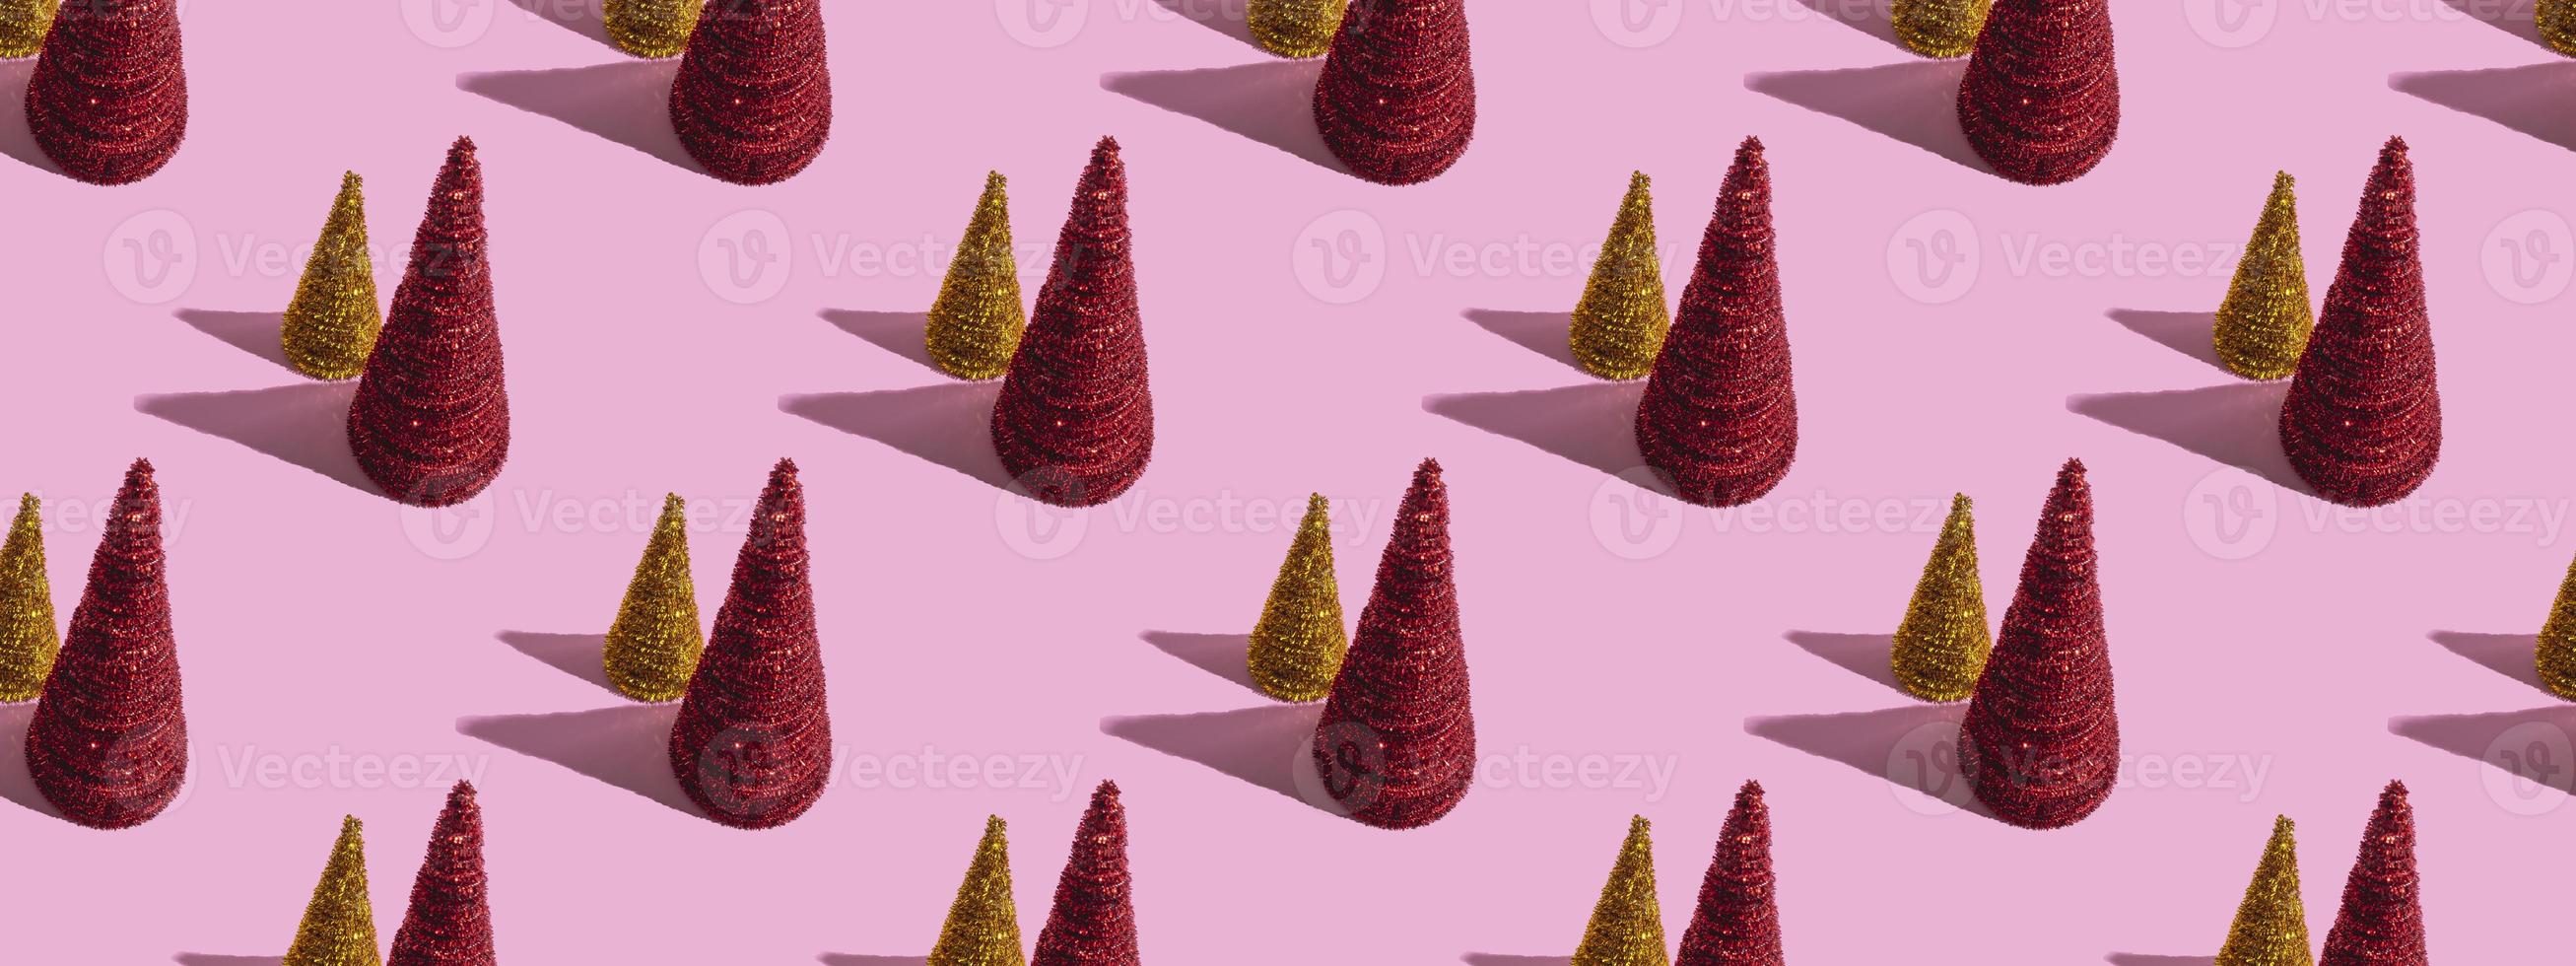 Colored Christmas trees on a pink background. Christmas concept, seamless pattern photo